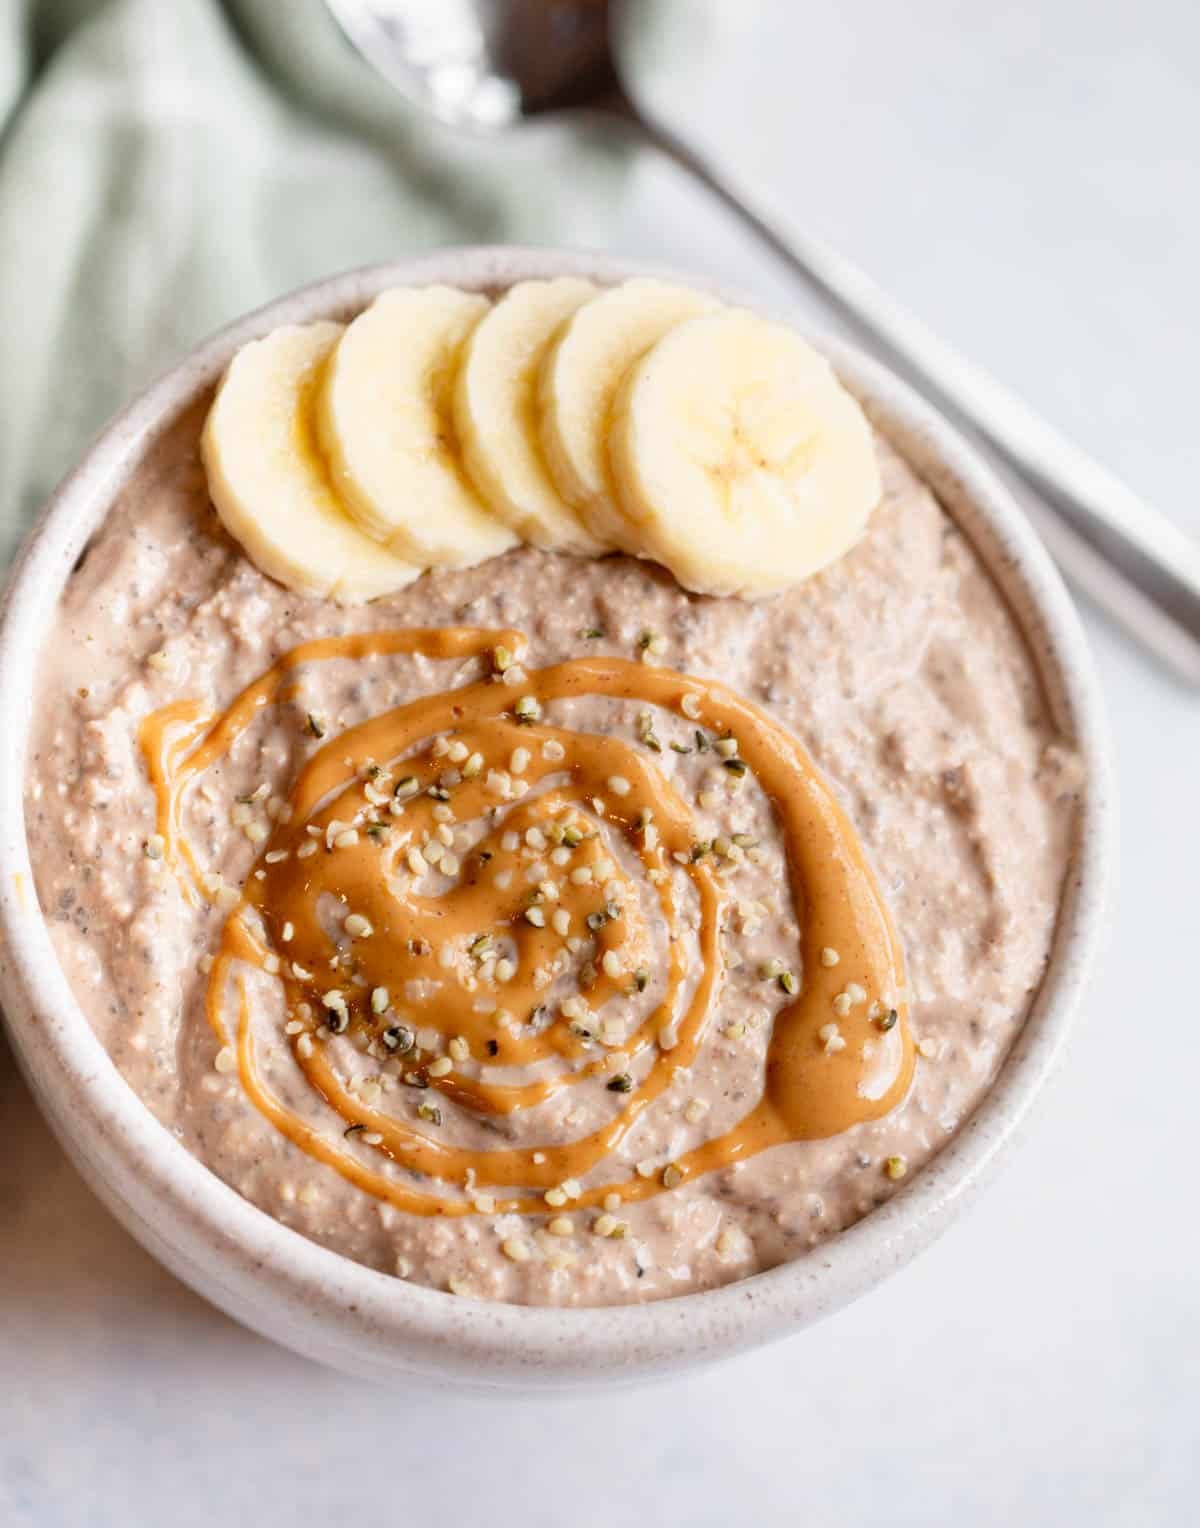 Peanut Butter Chocolate Blended Overnight Oats in a speckled bowl topped with sliced bananas, a drizzle of peanut butter, and hemp seed hearts. 